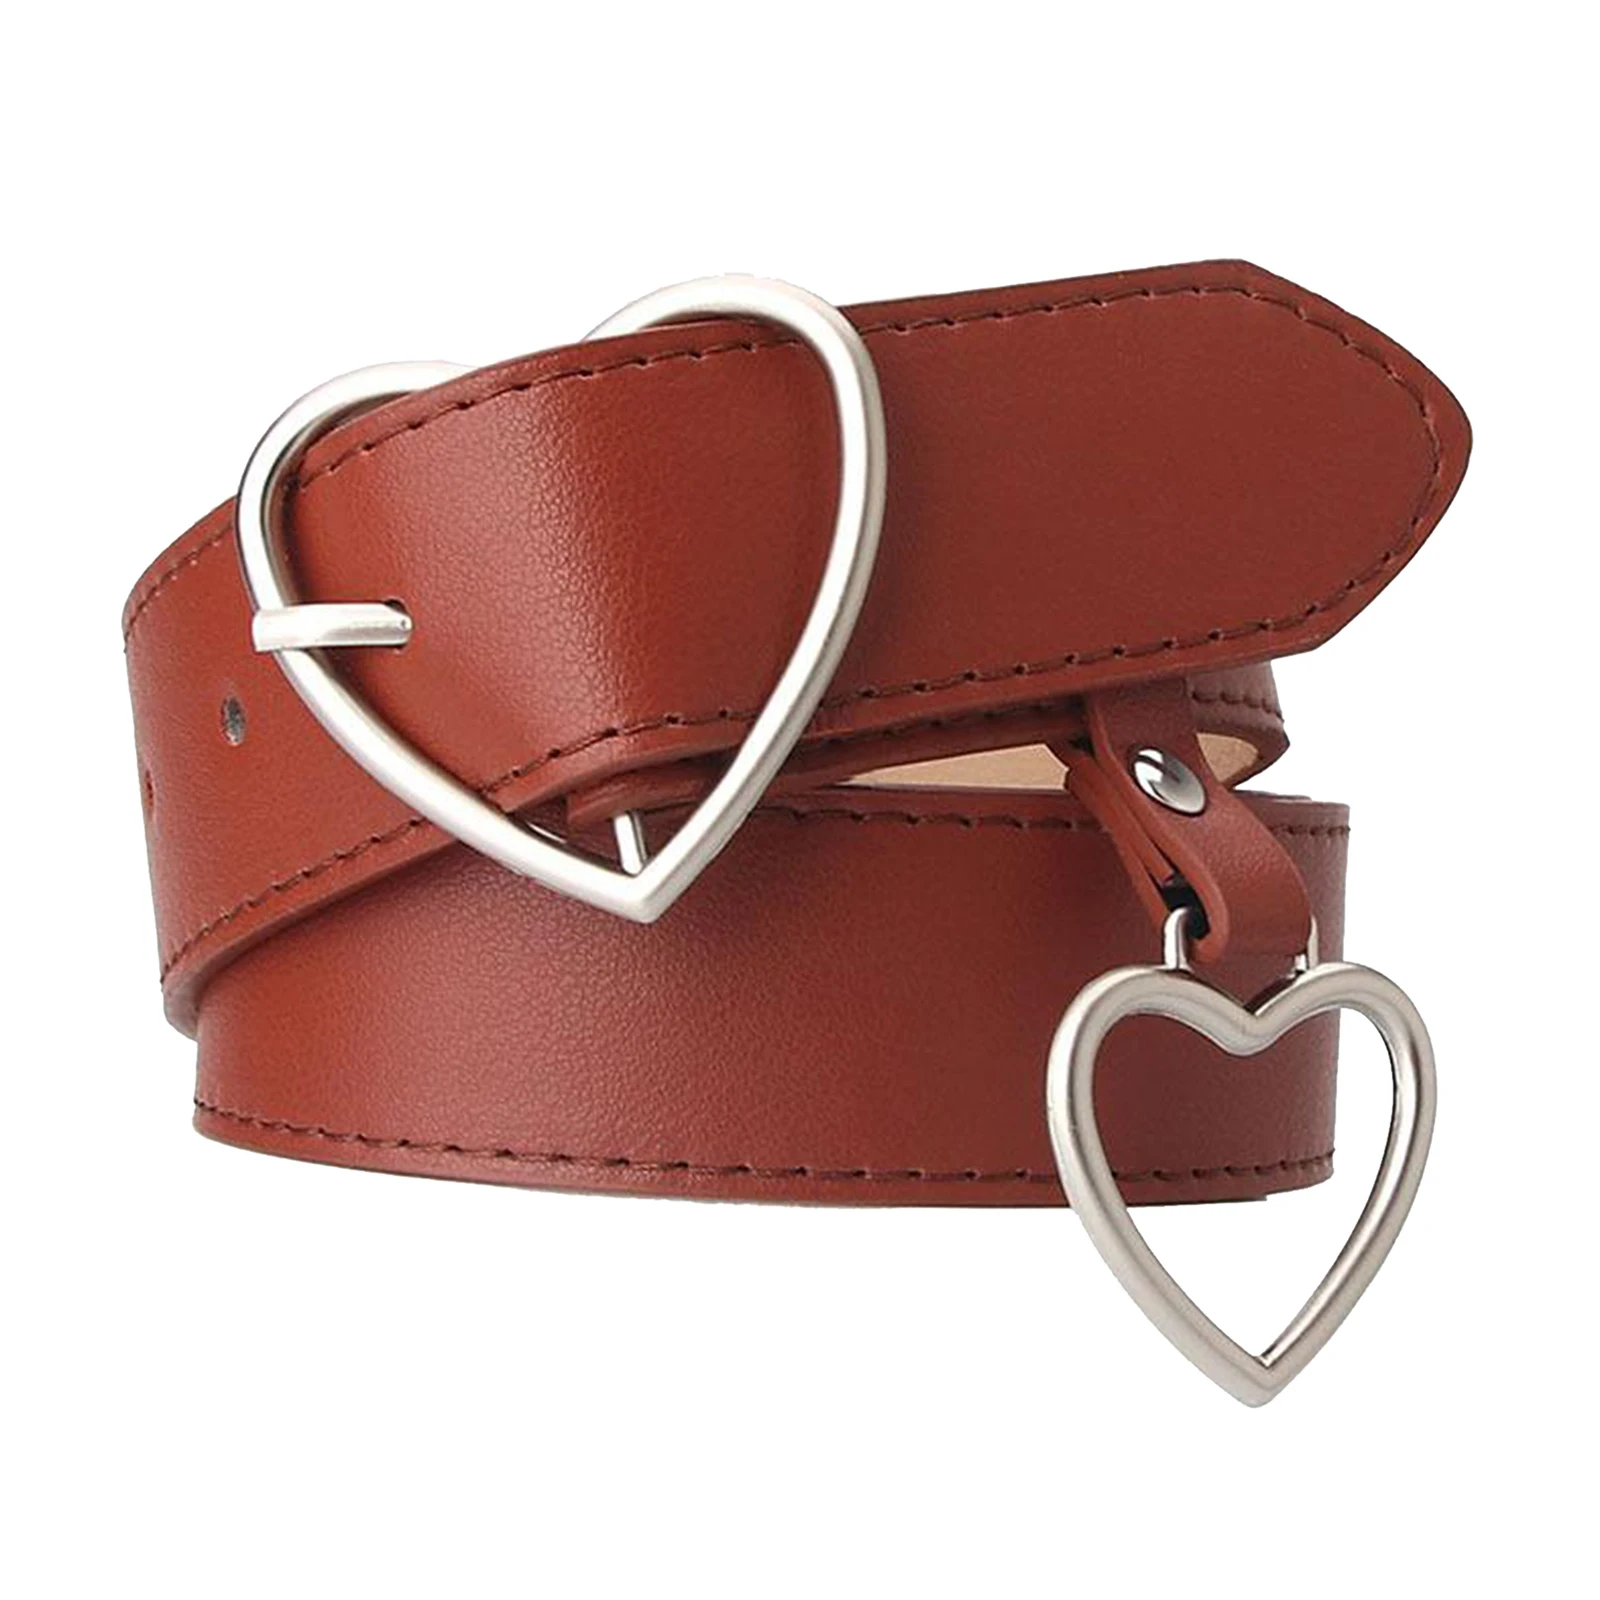 Heart Shaped Belt, Wide Faux Leather Waist Belts with Pin Buckle for Women Girls Jeans Pants Dresses Accessories